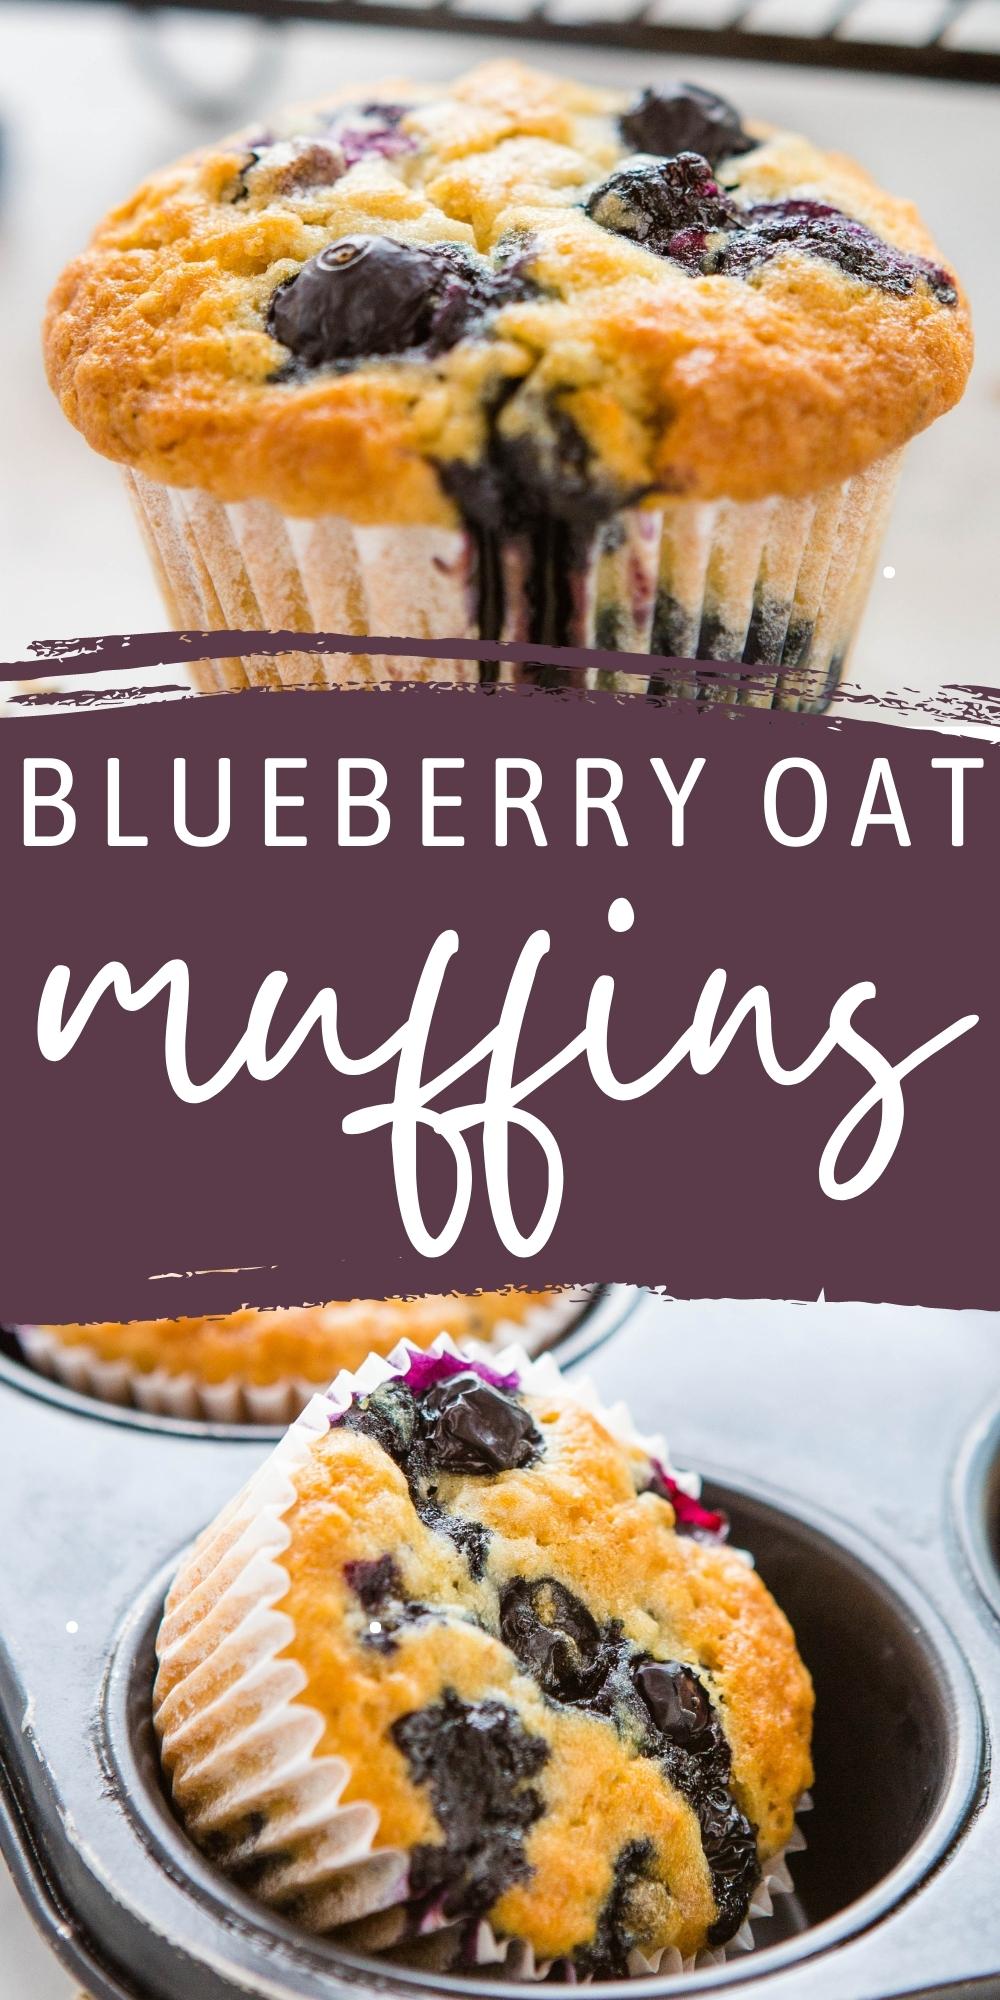 These Blueberry Oat Muffins are the perfect sweet snack or breakfast made with whole grain oats and delicious fresh blueberries - moist and tender! Recipe from thebusybaker.ca! #blueberryoatmuffins #homemademuffins #oatmealmuffins #blueberrymuffins via @busybakerblog